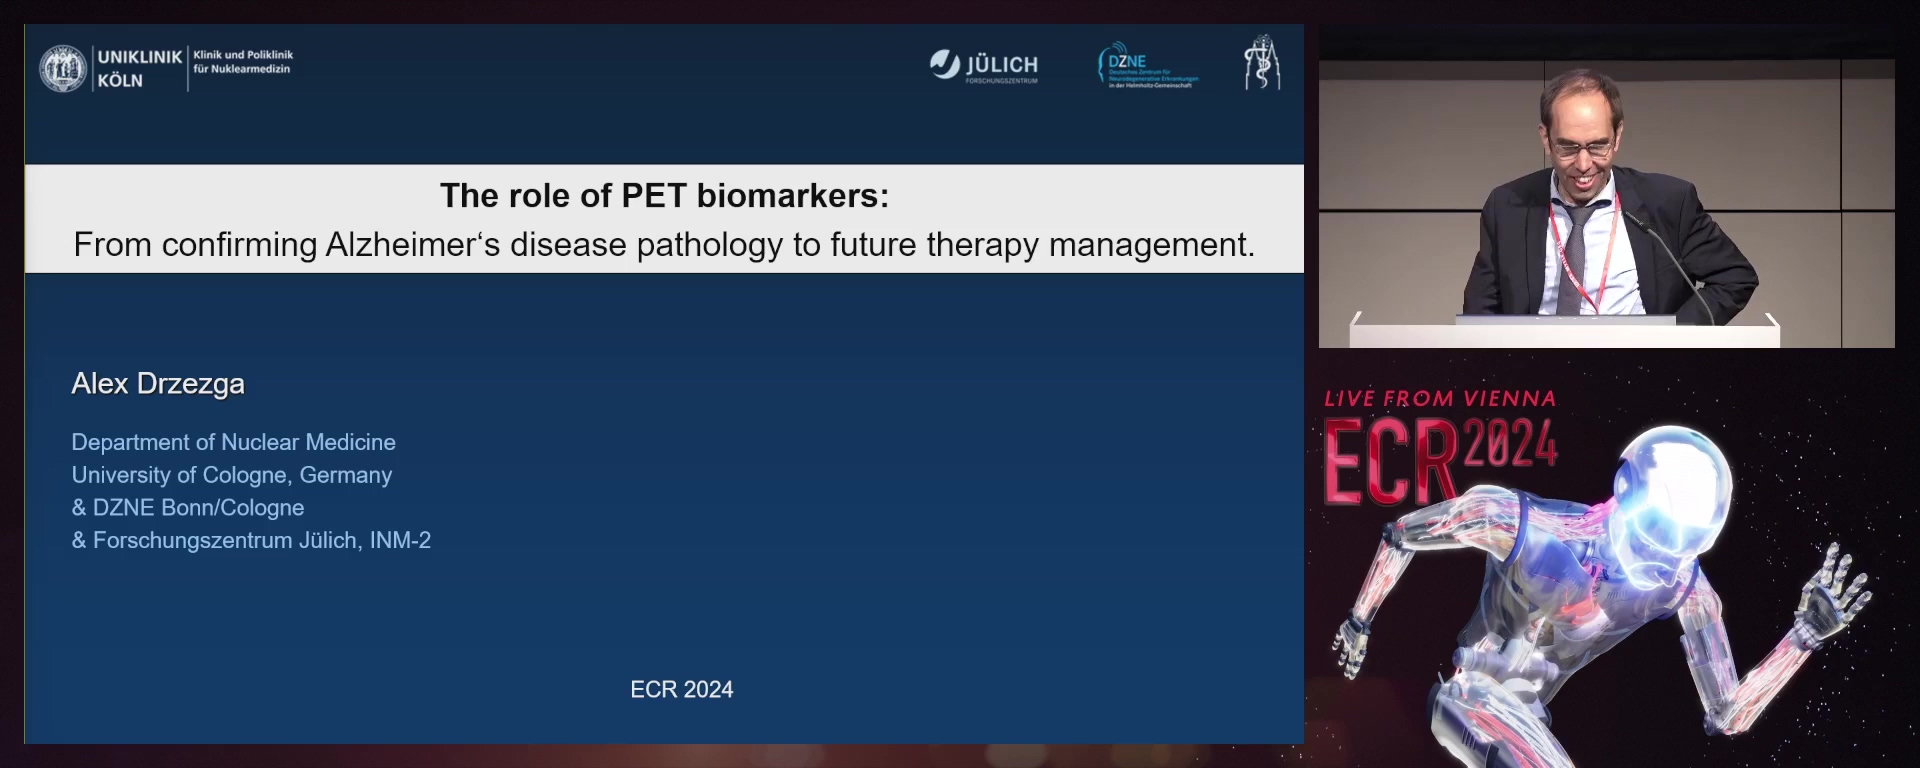 The role of PET biomarkers: From confirming Alzheimer’s Disease pathology to future therapy management.